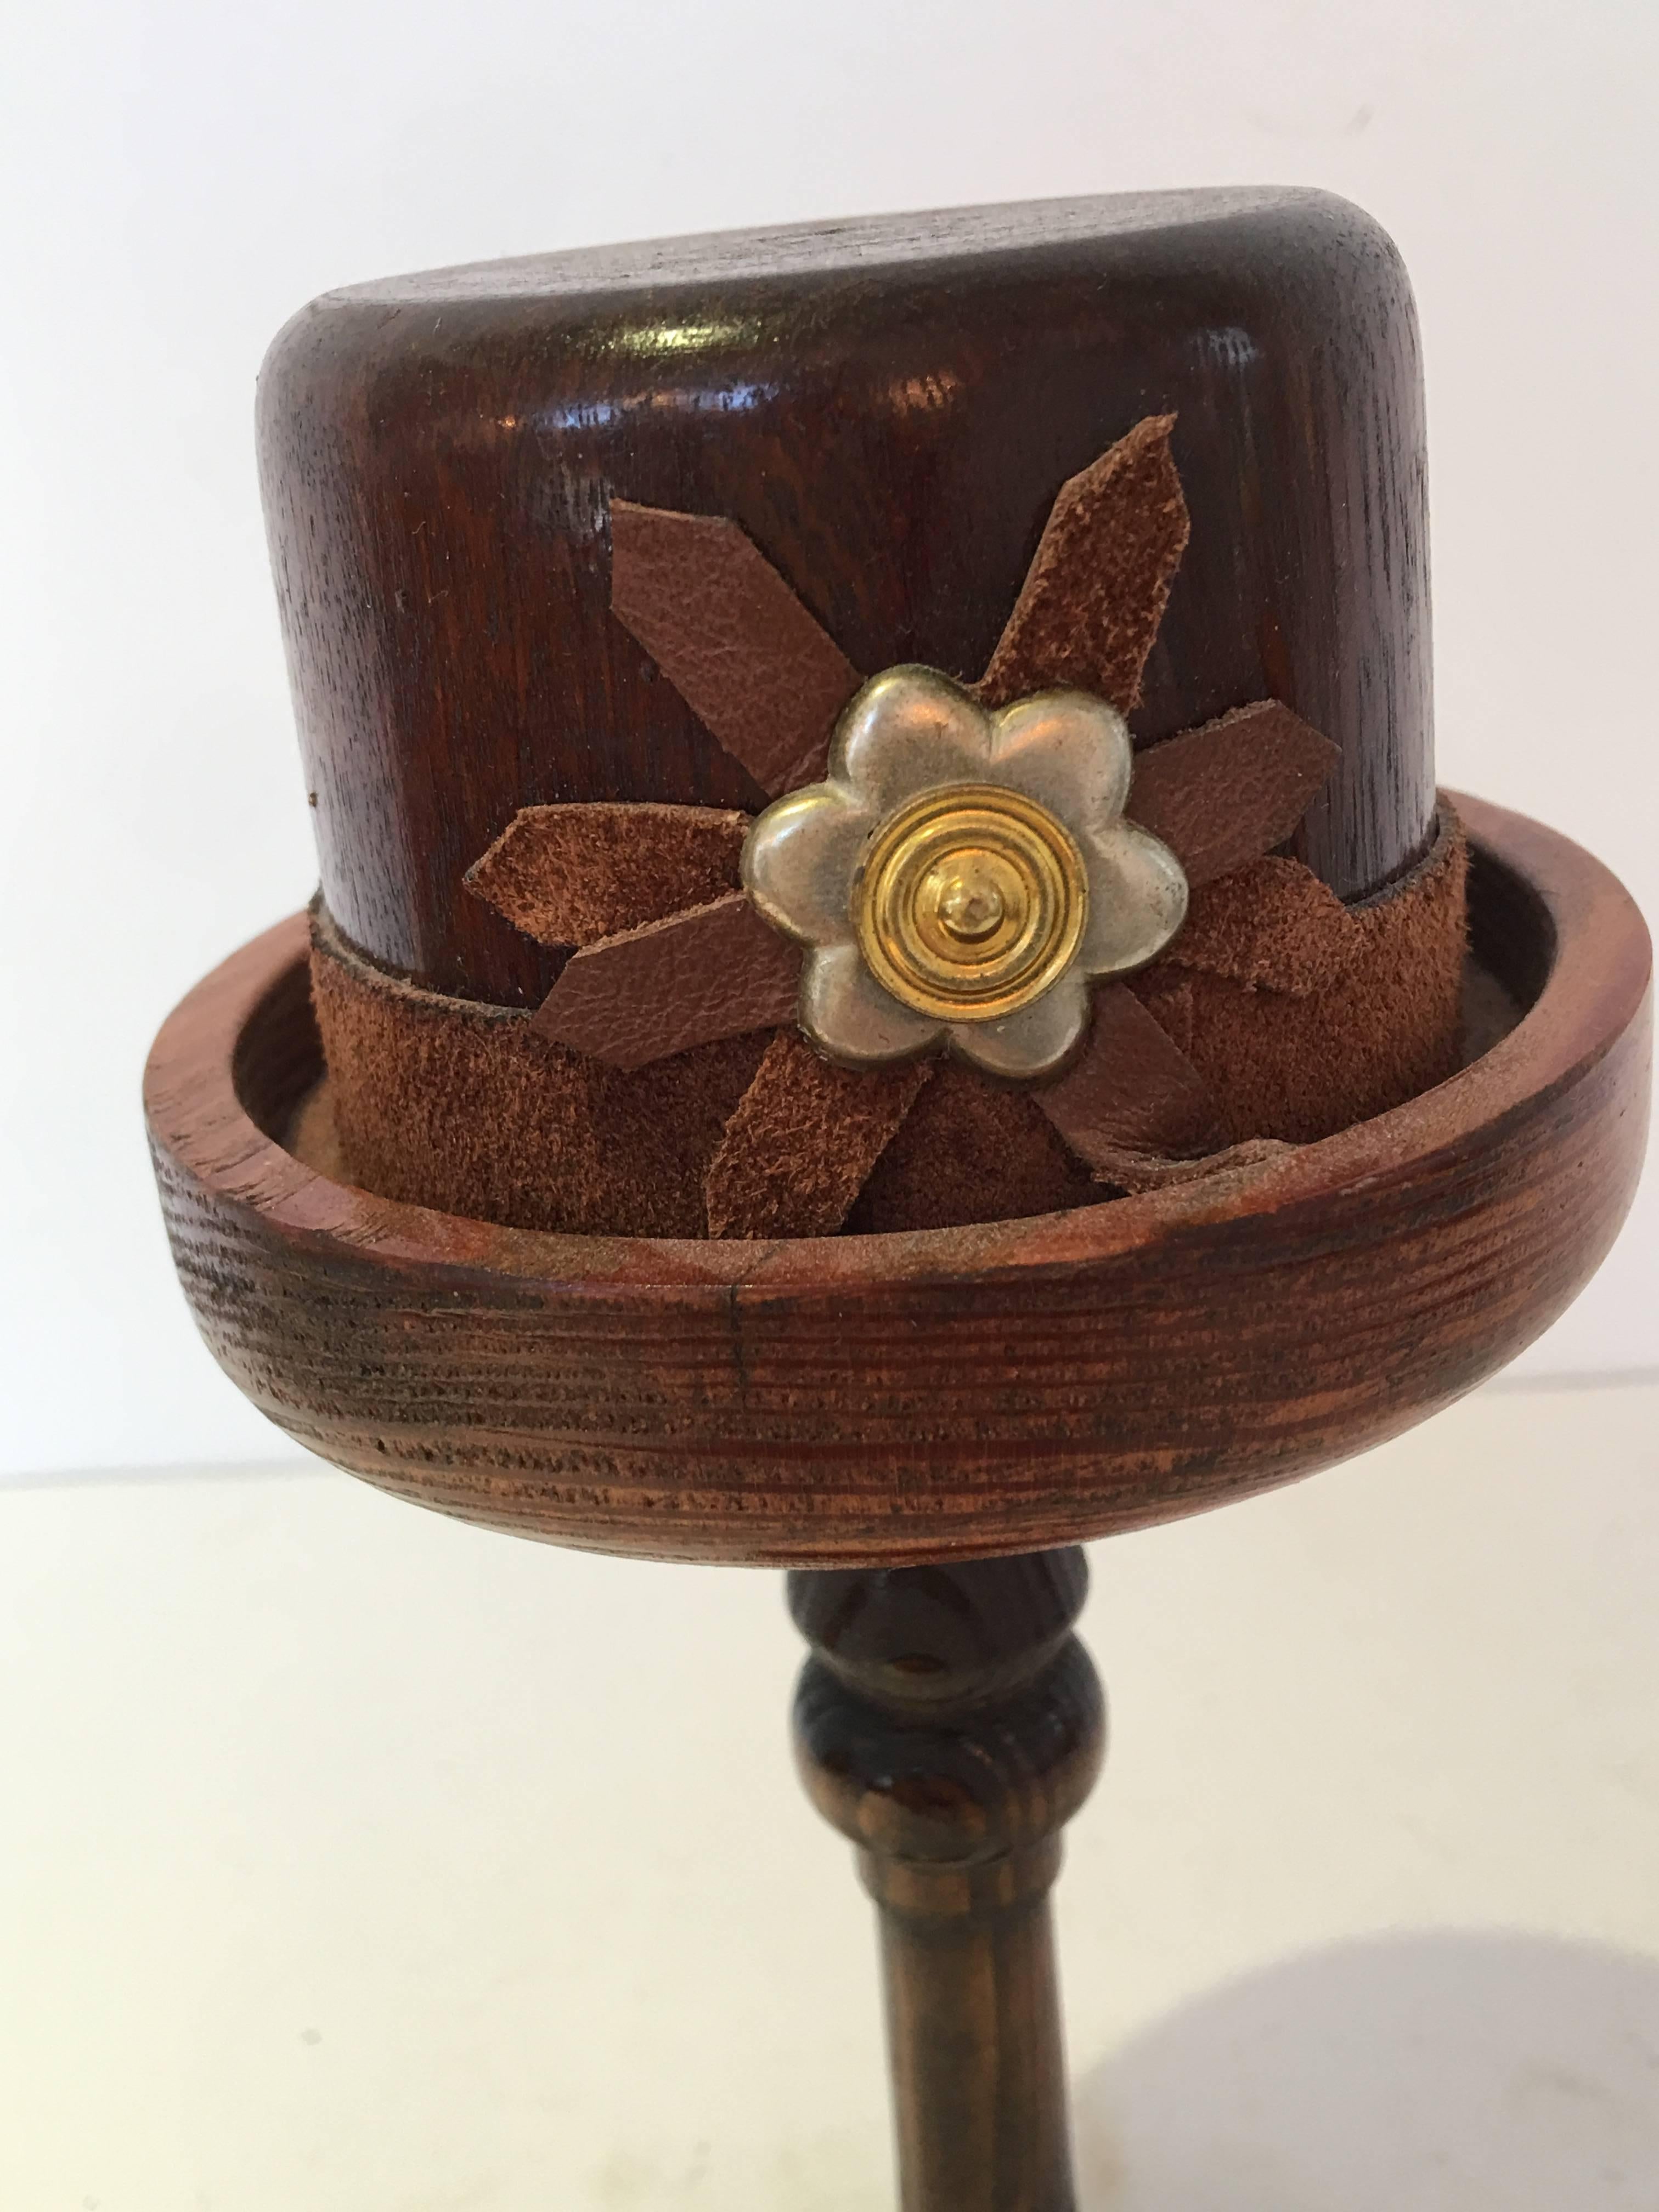 English wood doll hat mold on wood stand
circa 1920s-1940s #793/ 8276
Top hat with metal and leather flower detail and leather ribbon.